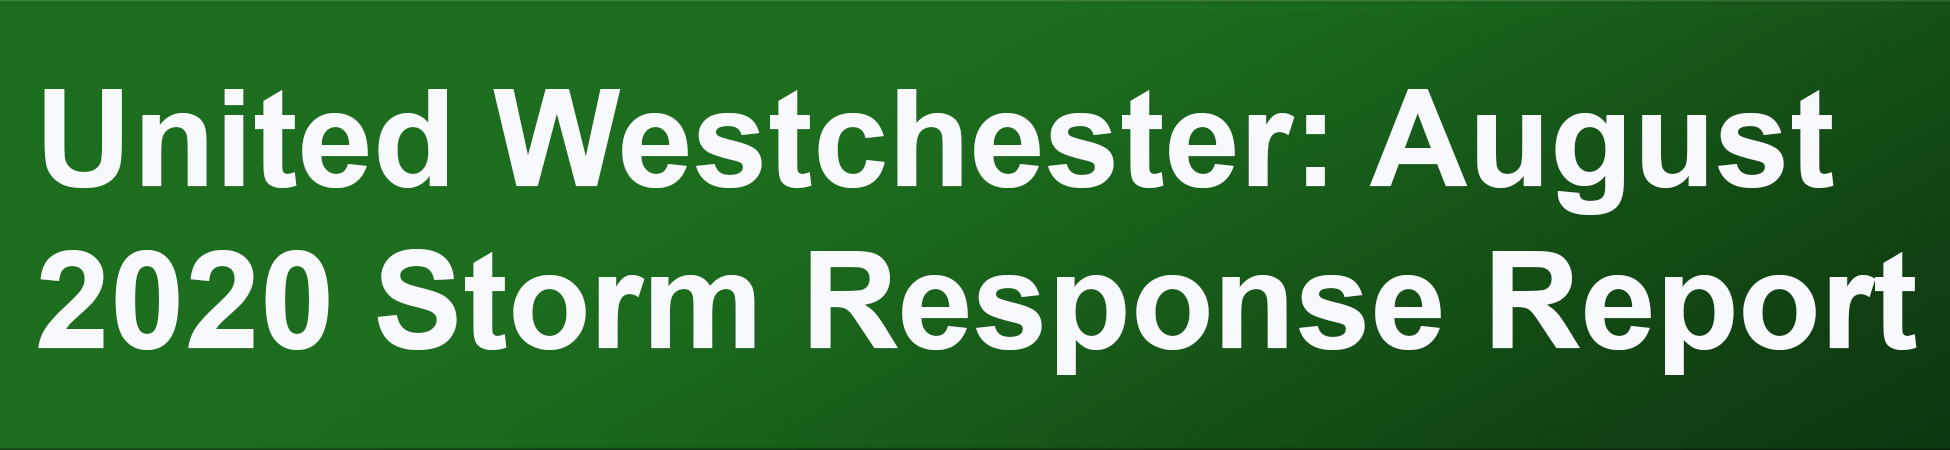 United Westchester August 2020 Storm Response Report